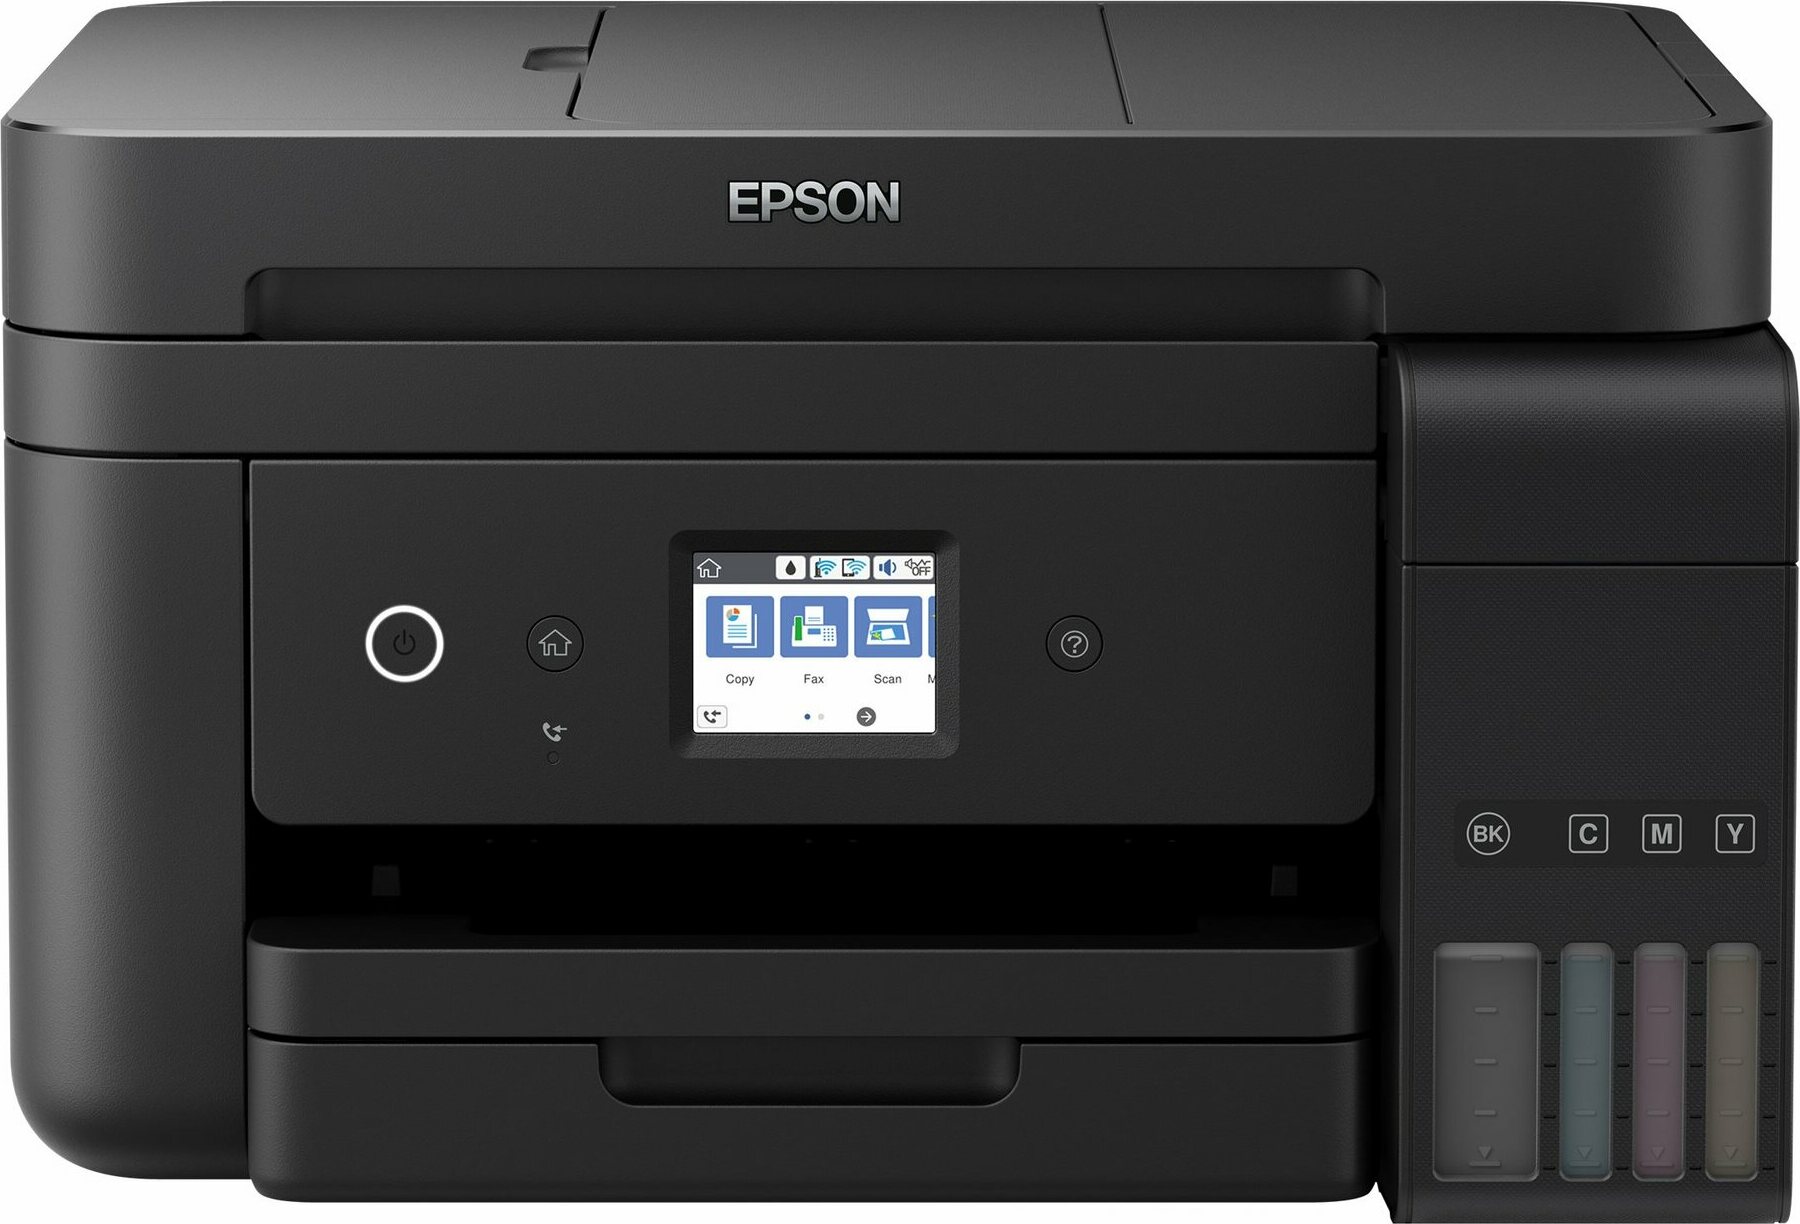 Epson Event Manager Mac Et-4750 / Epson Event Manager ...